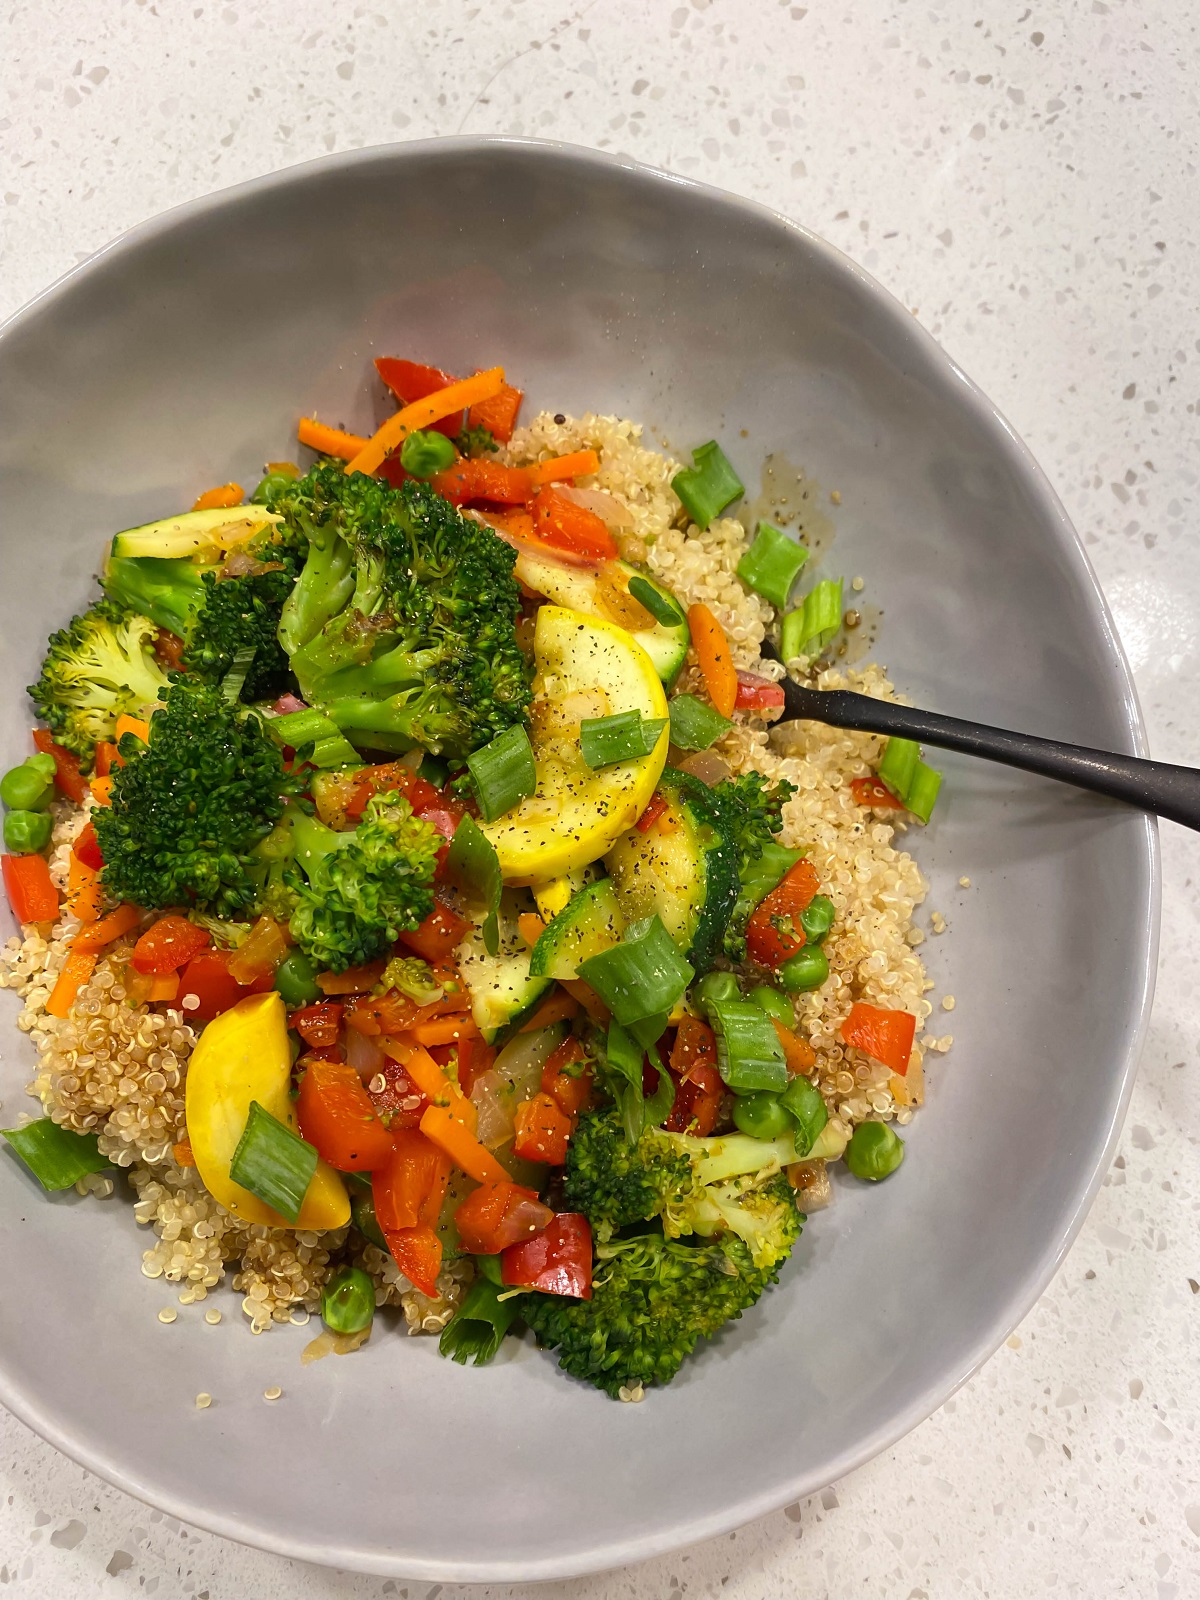 broccoli zucchini red bell pepper on top of cooked quinoa in gray bowl